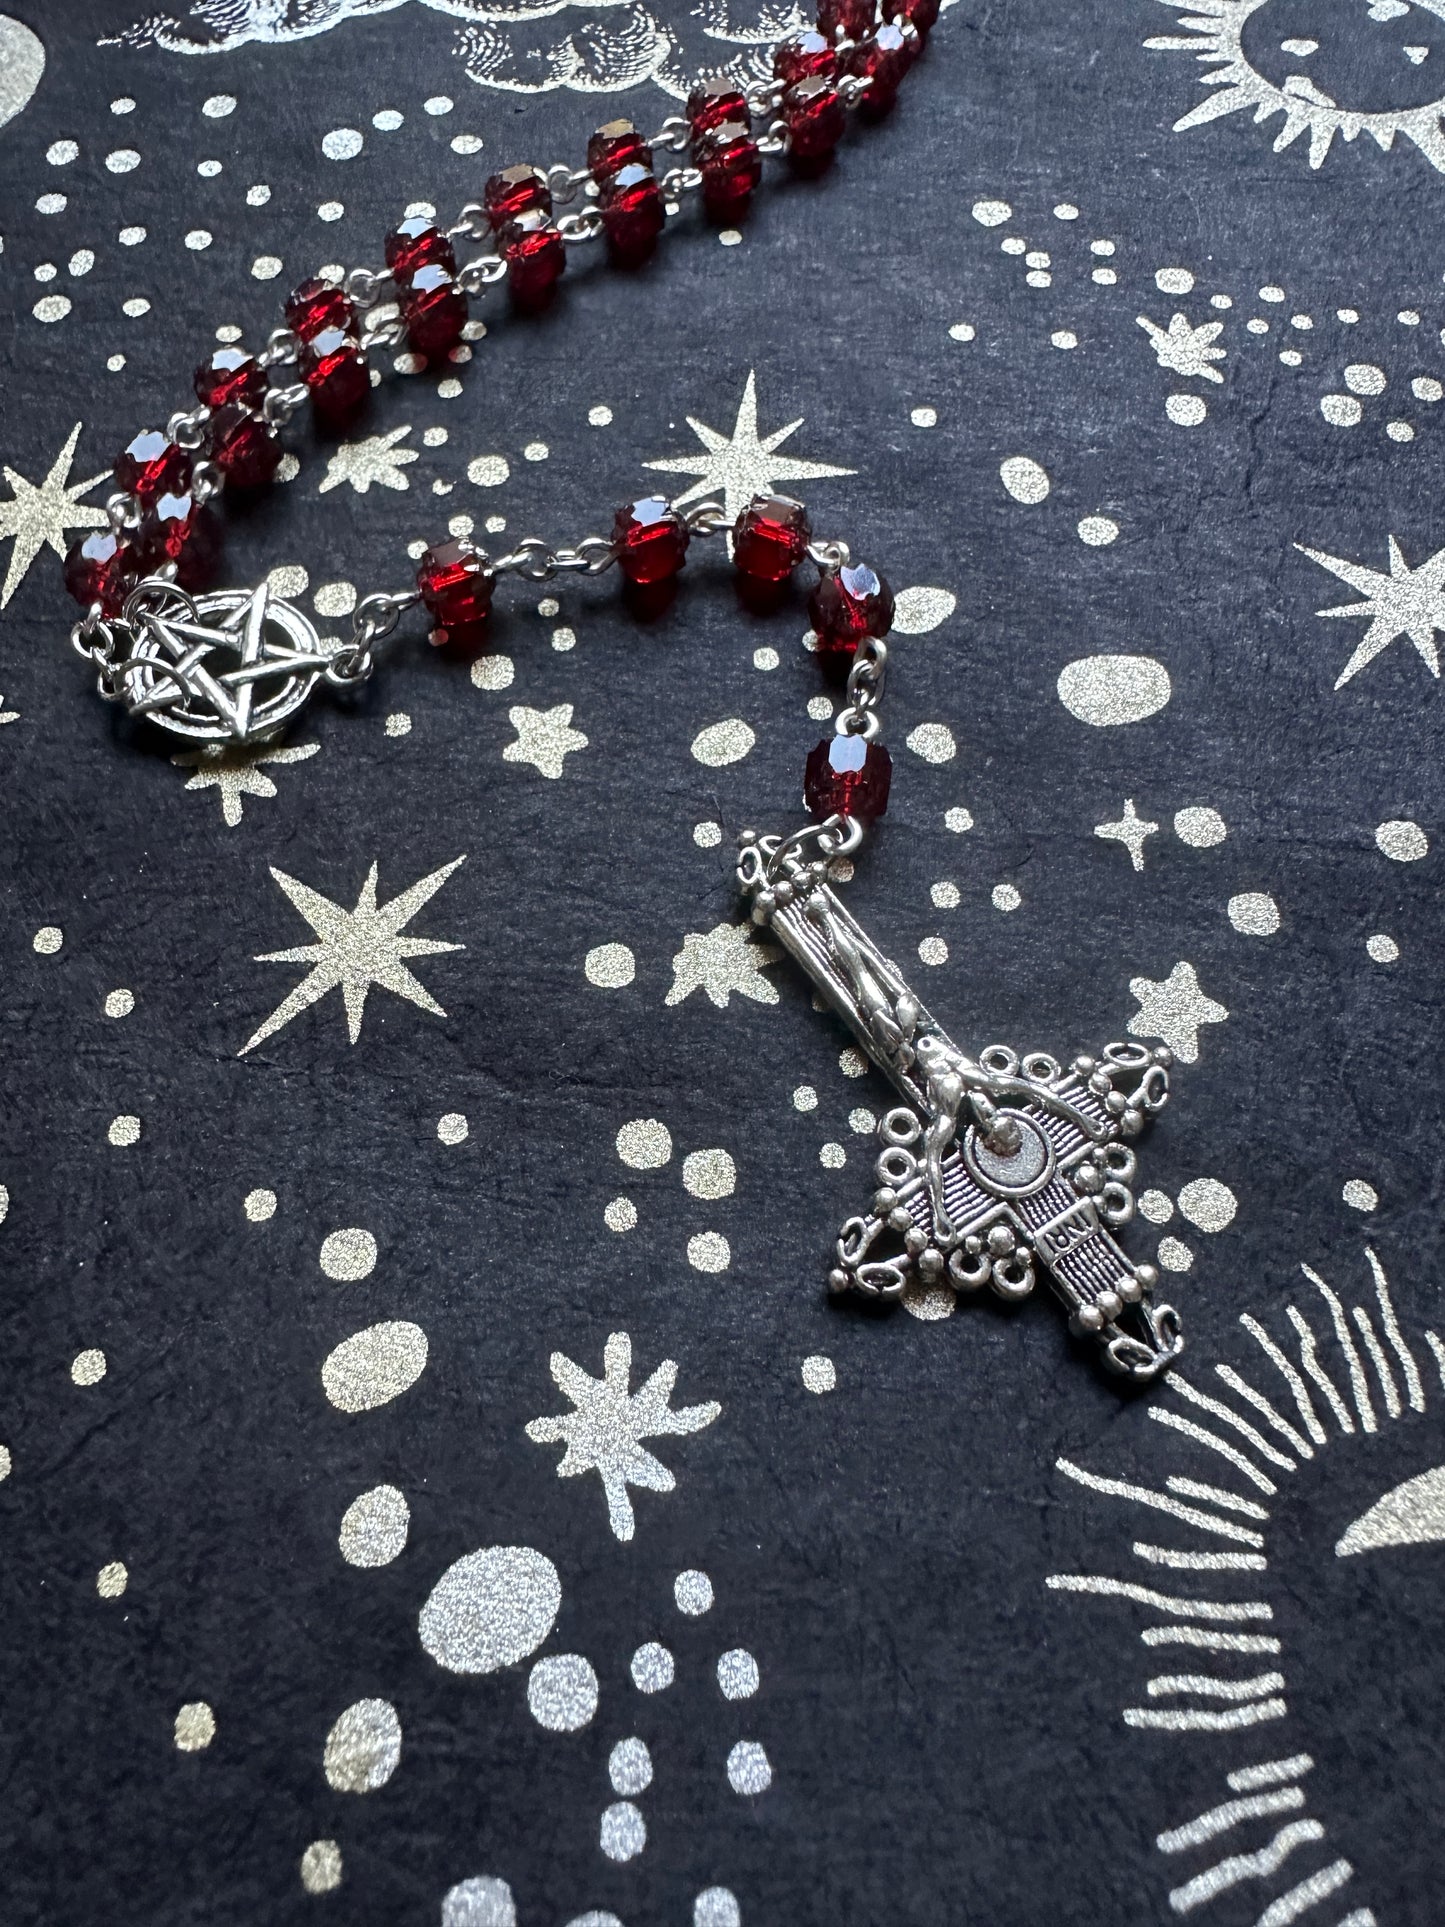 Red cathedral bead unholy rosary